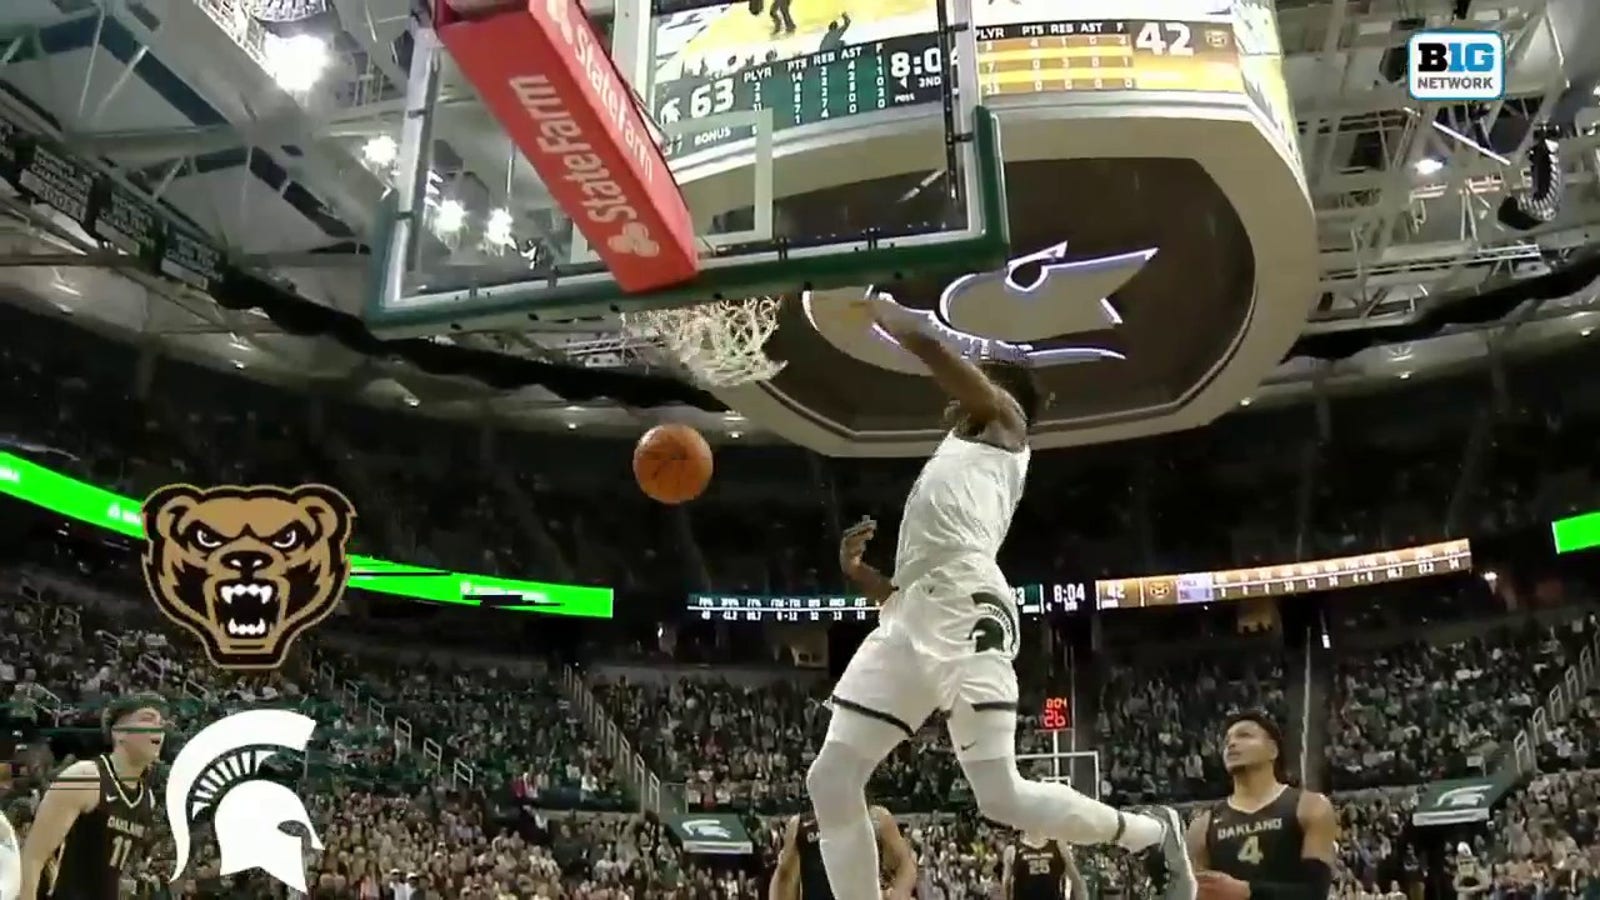 Coen Carr throws down a nasty dunk in transition, extending Michigan State's lead vs. Oakland